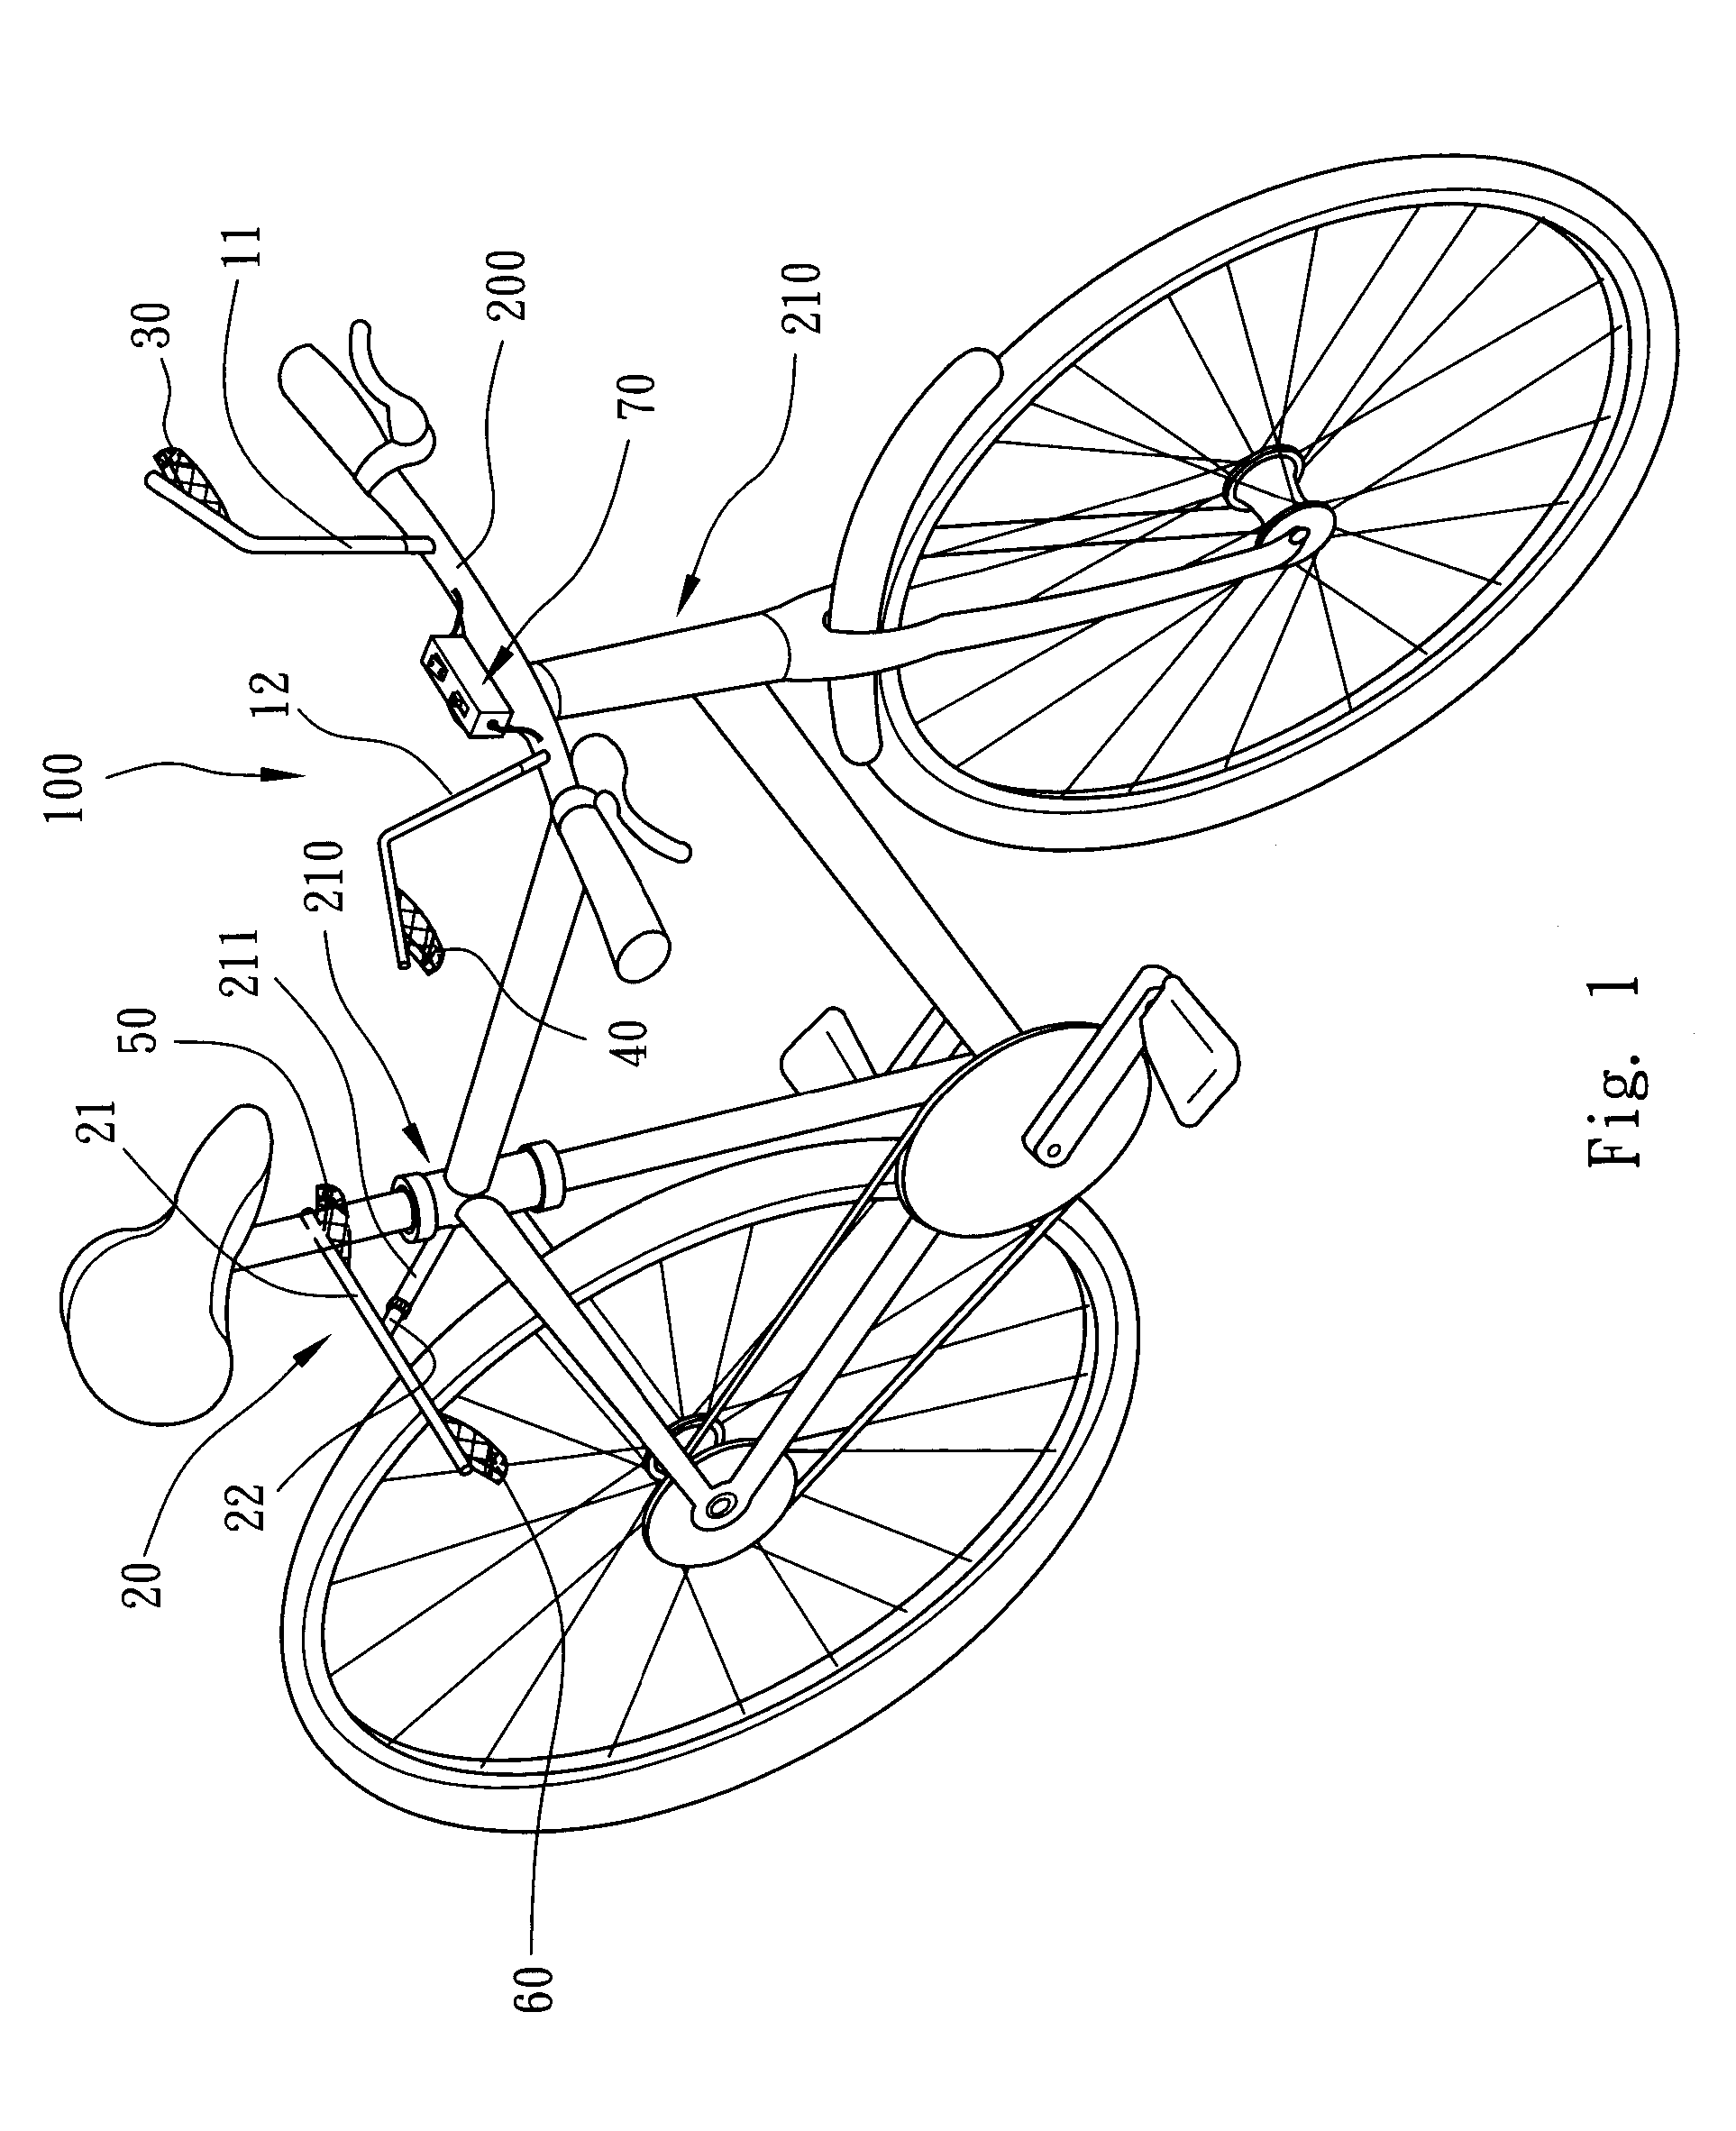 Direction light and illumination device for bicycle